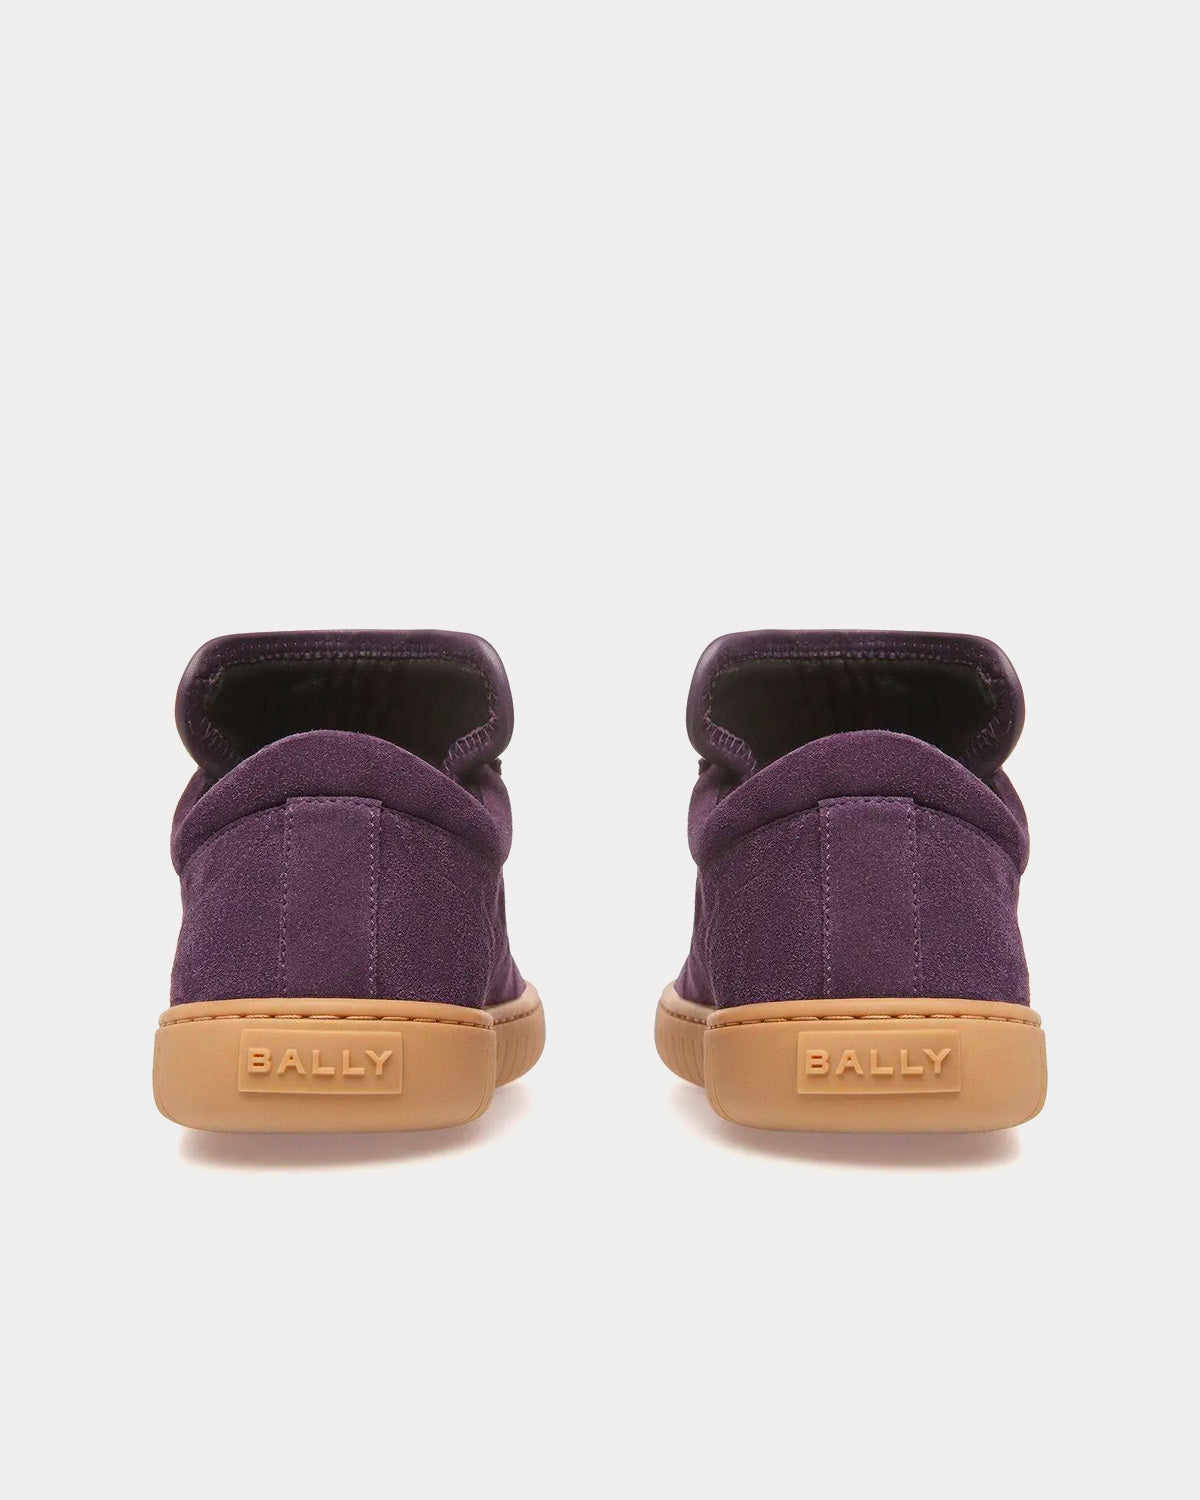 Bally - Player Suede Orchid / Amber Low Top Sneakers